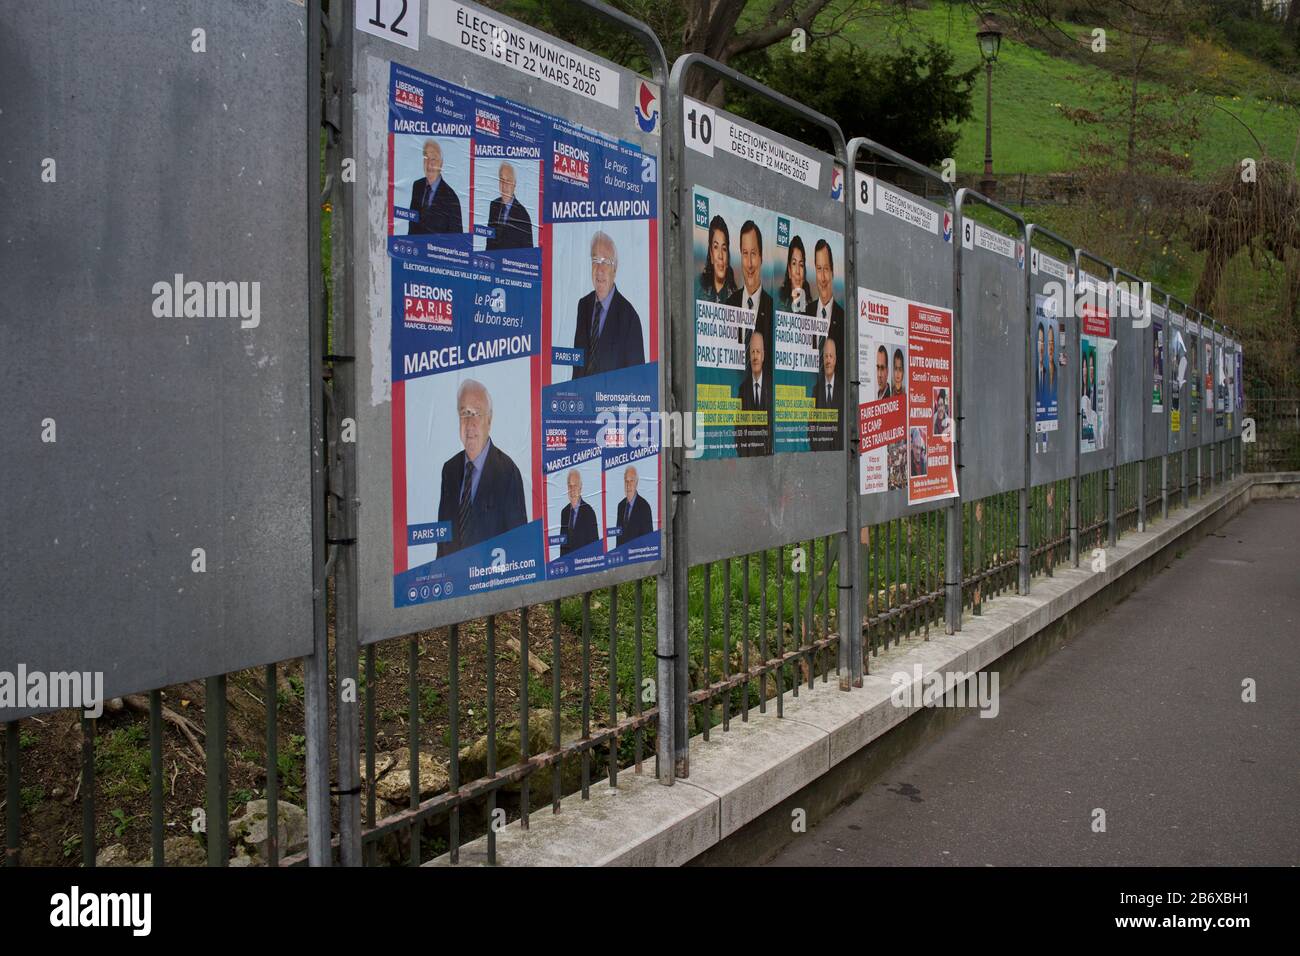 Official display panels showing electoral candidates of French municipal elections, amid Coronavirus concerns, rue Ronsard, Montmartre, 75018 Paris, France, March 2020 Stock Photo